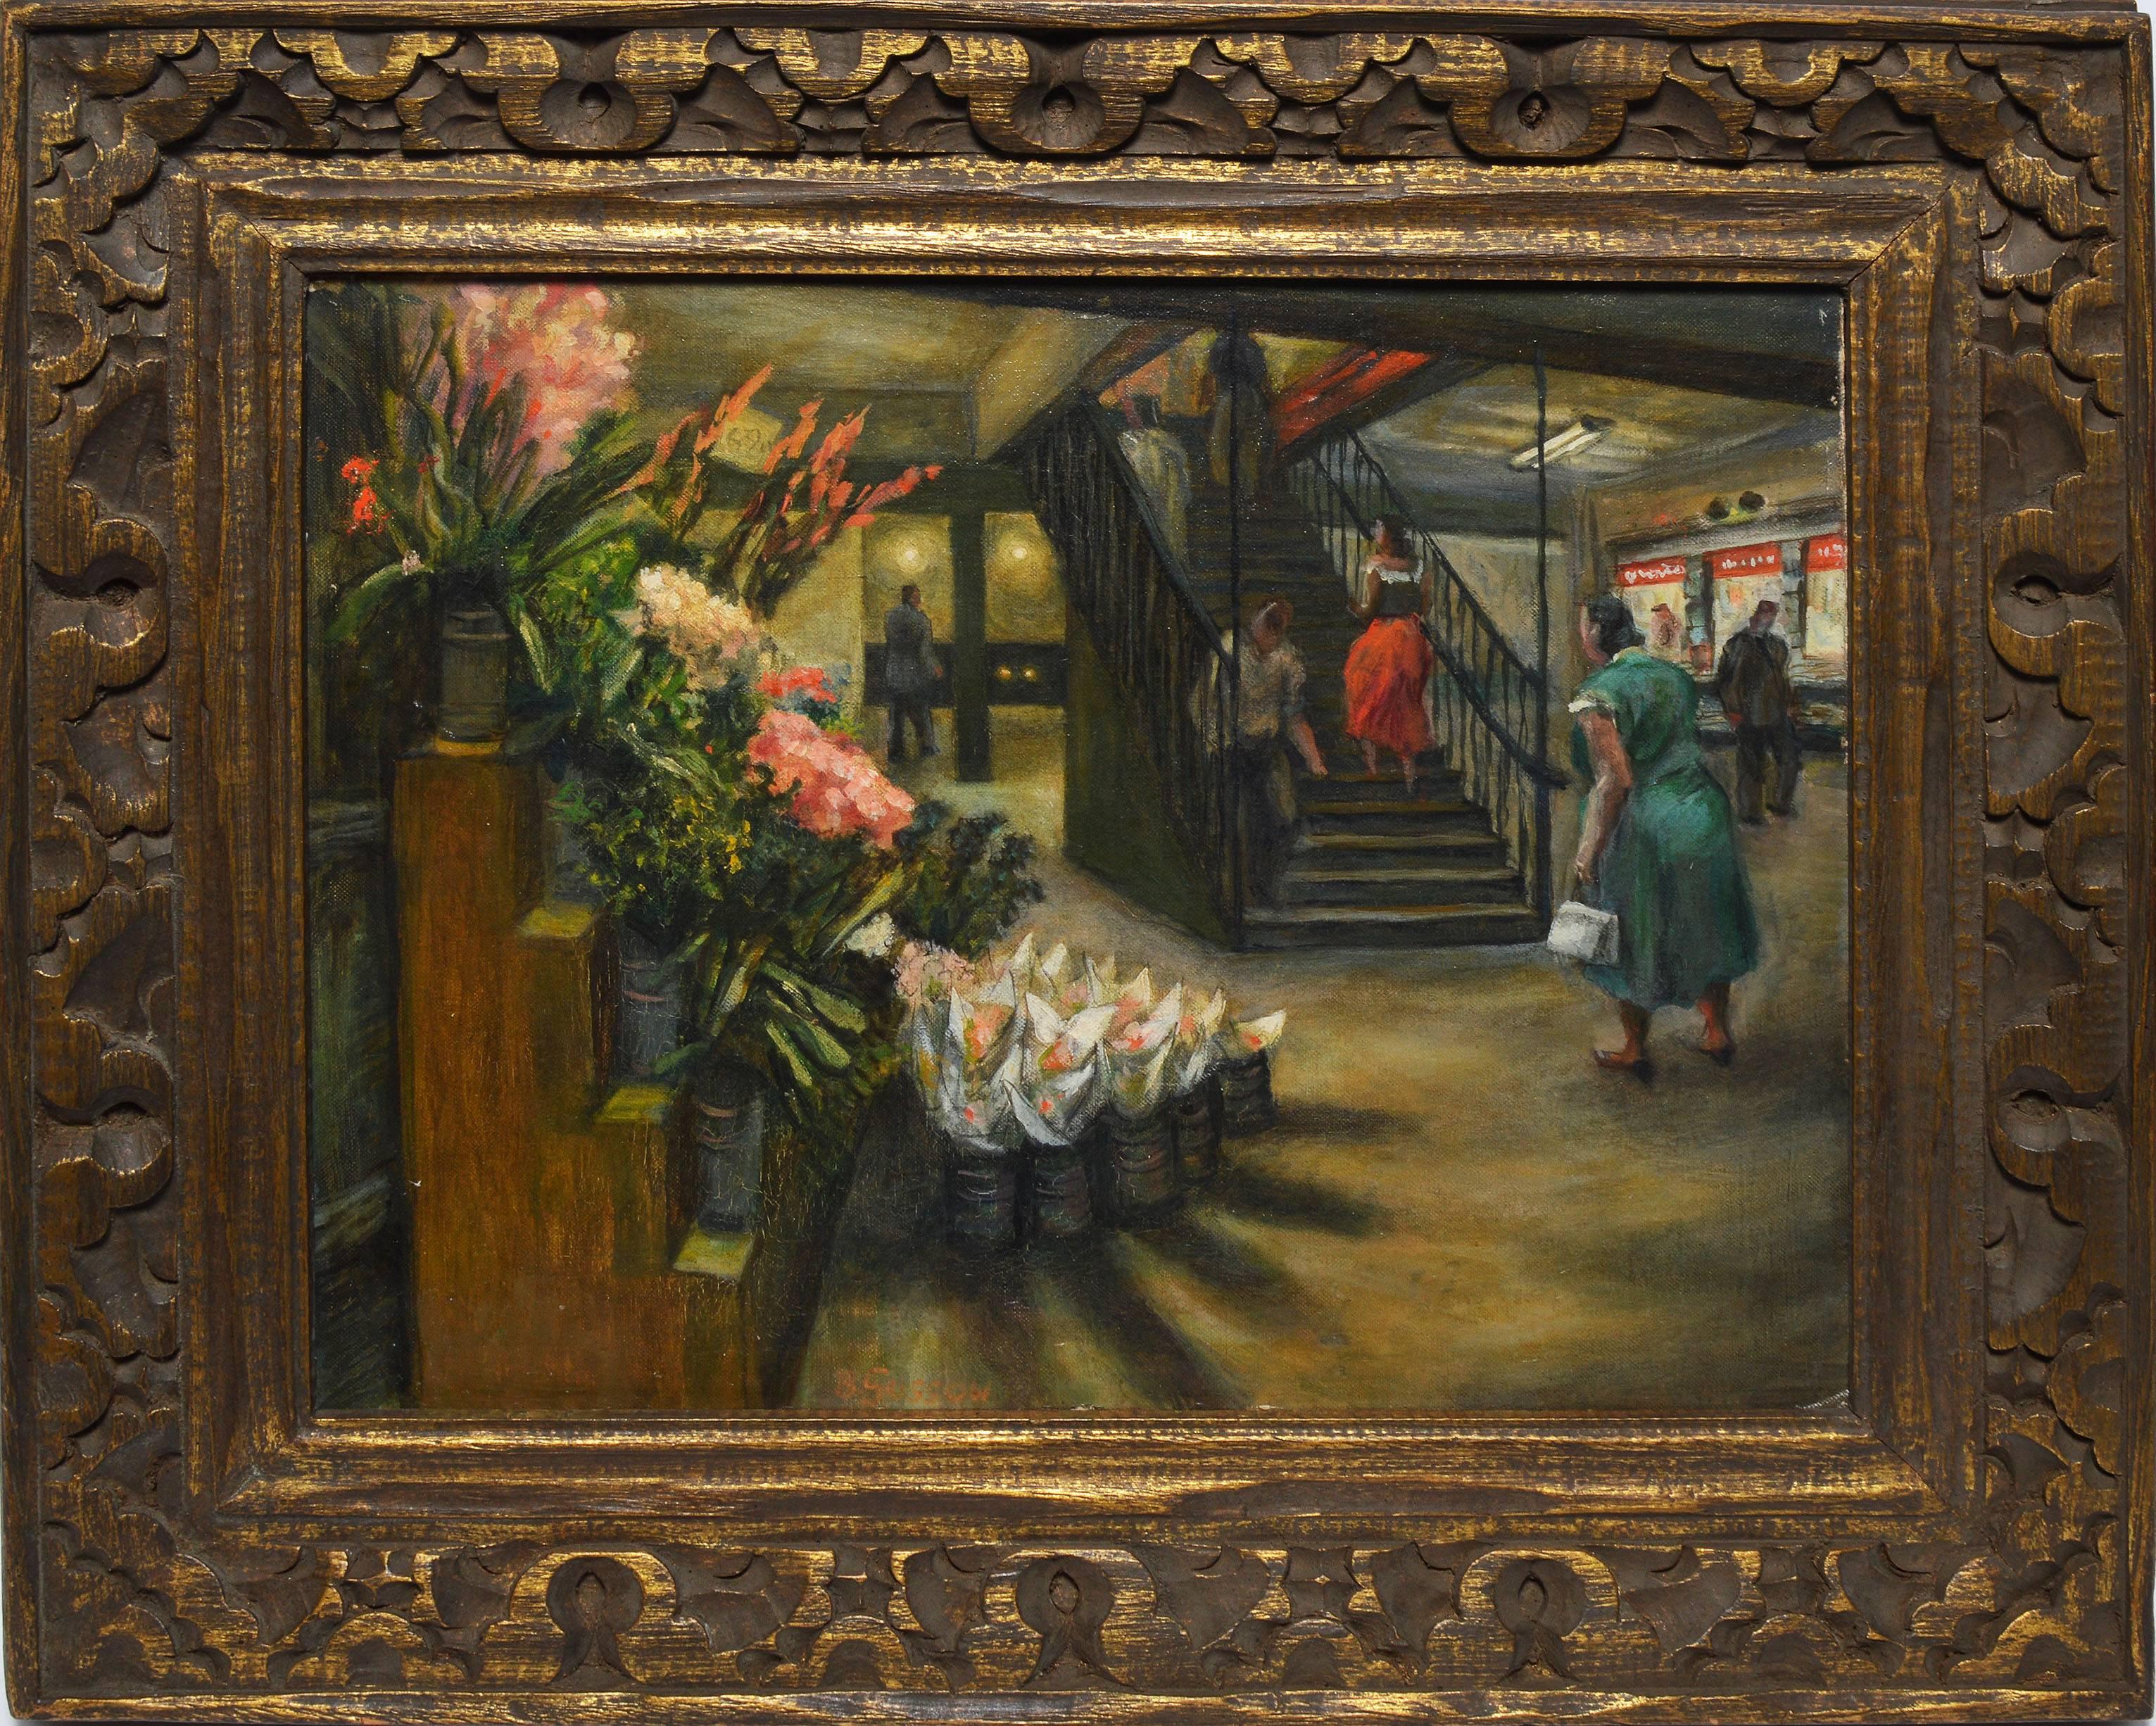 Unknown Figurative Painting - Modernist View of the New York City Subway